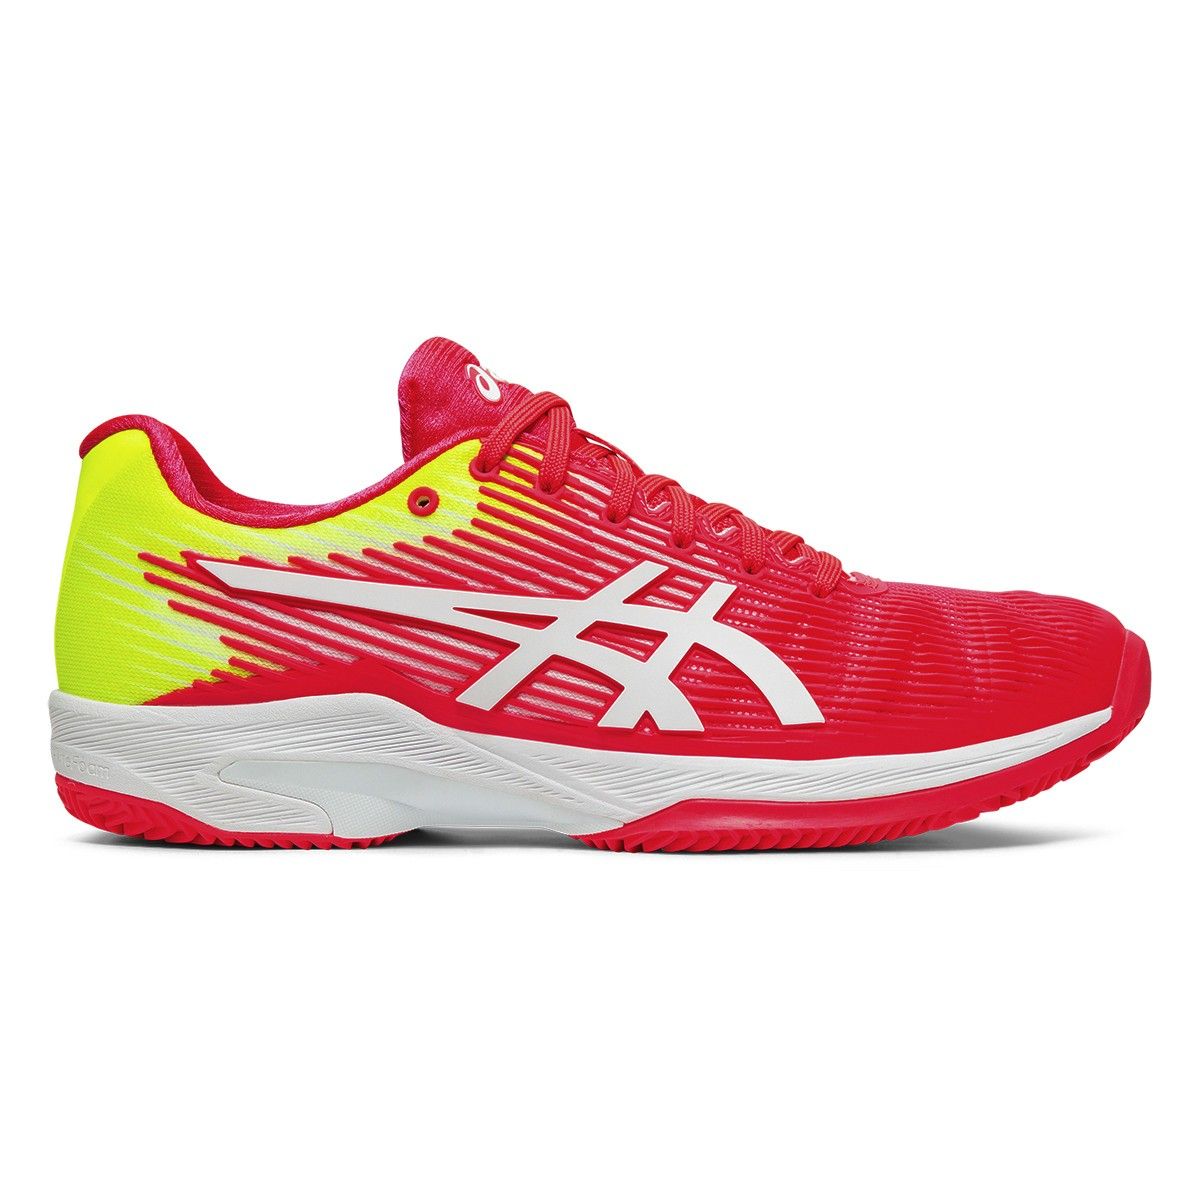 Asics Gel Solution Speed FF Clay Women's Tennis Shoes 1042A0